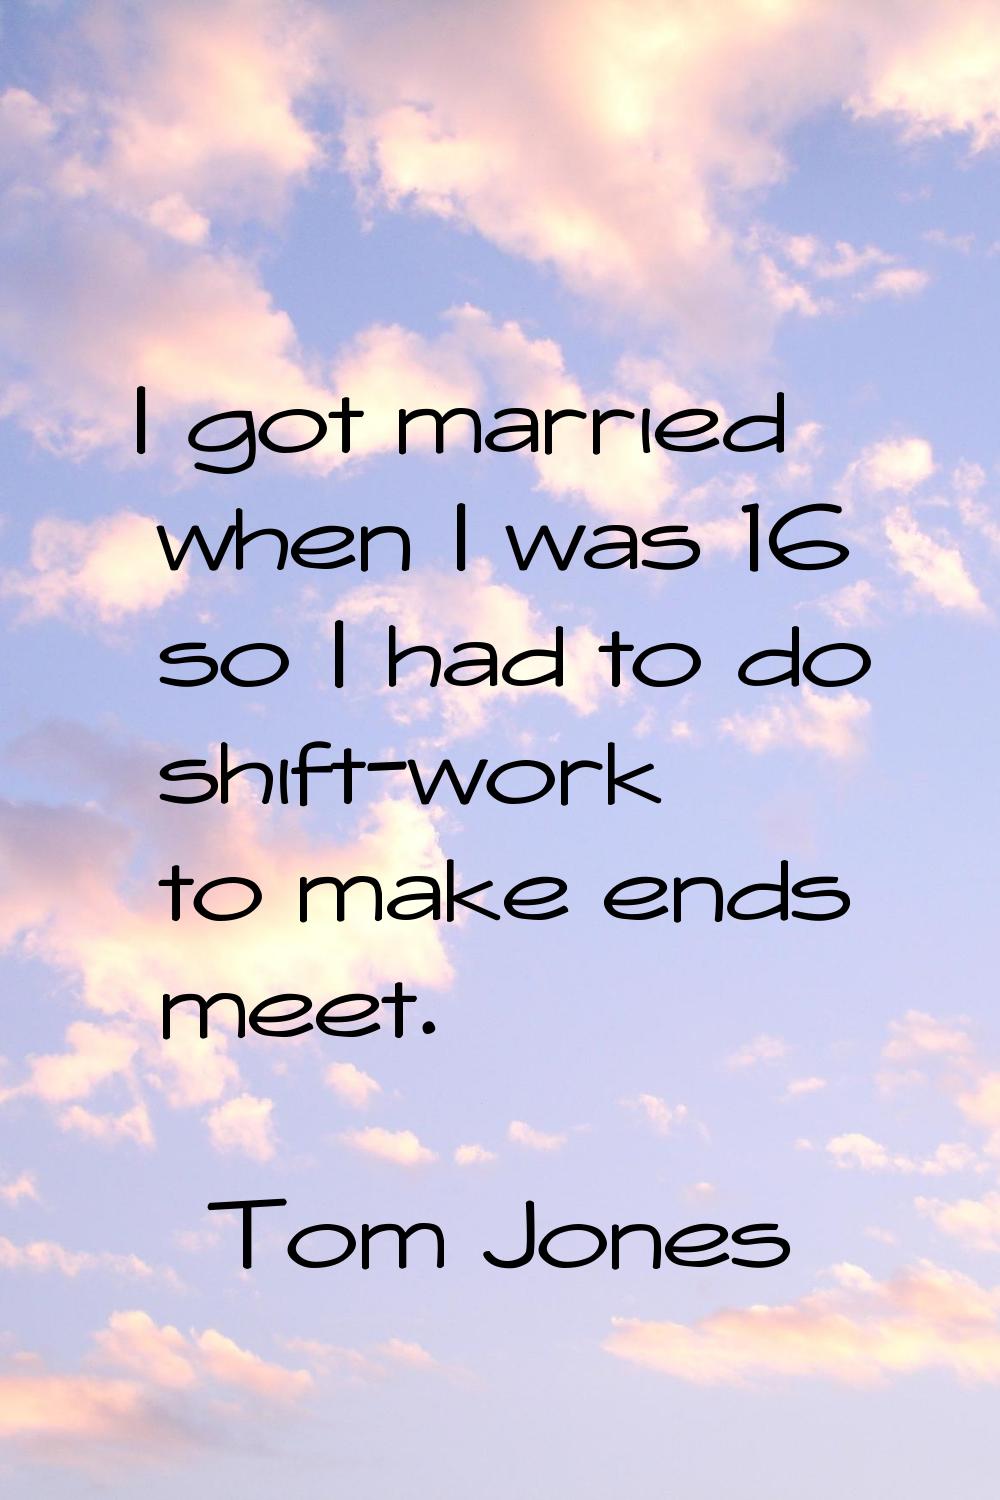 I got married when I was 16 so I had to do shift-work to make ends meet.